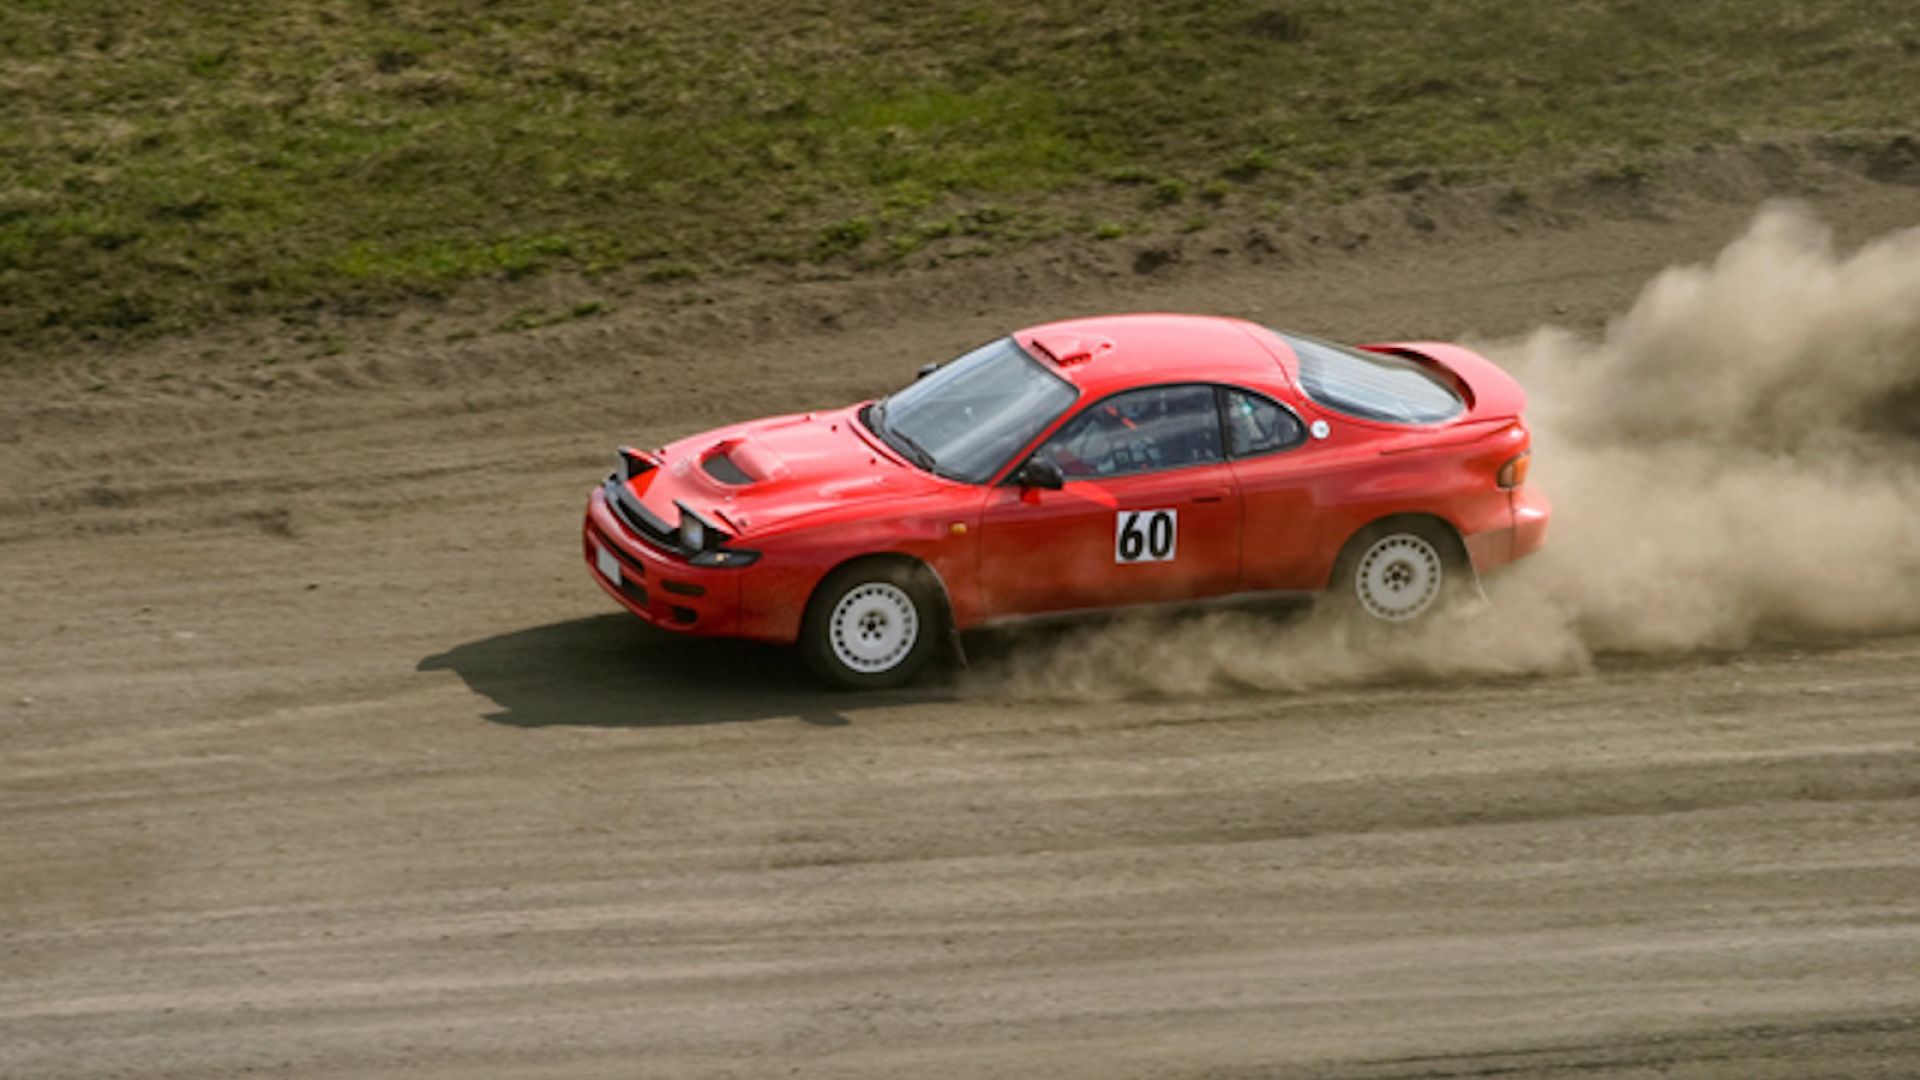 A Person Driving A Race Car On A Dirt Track